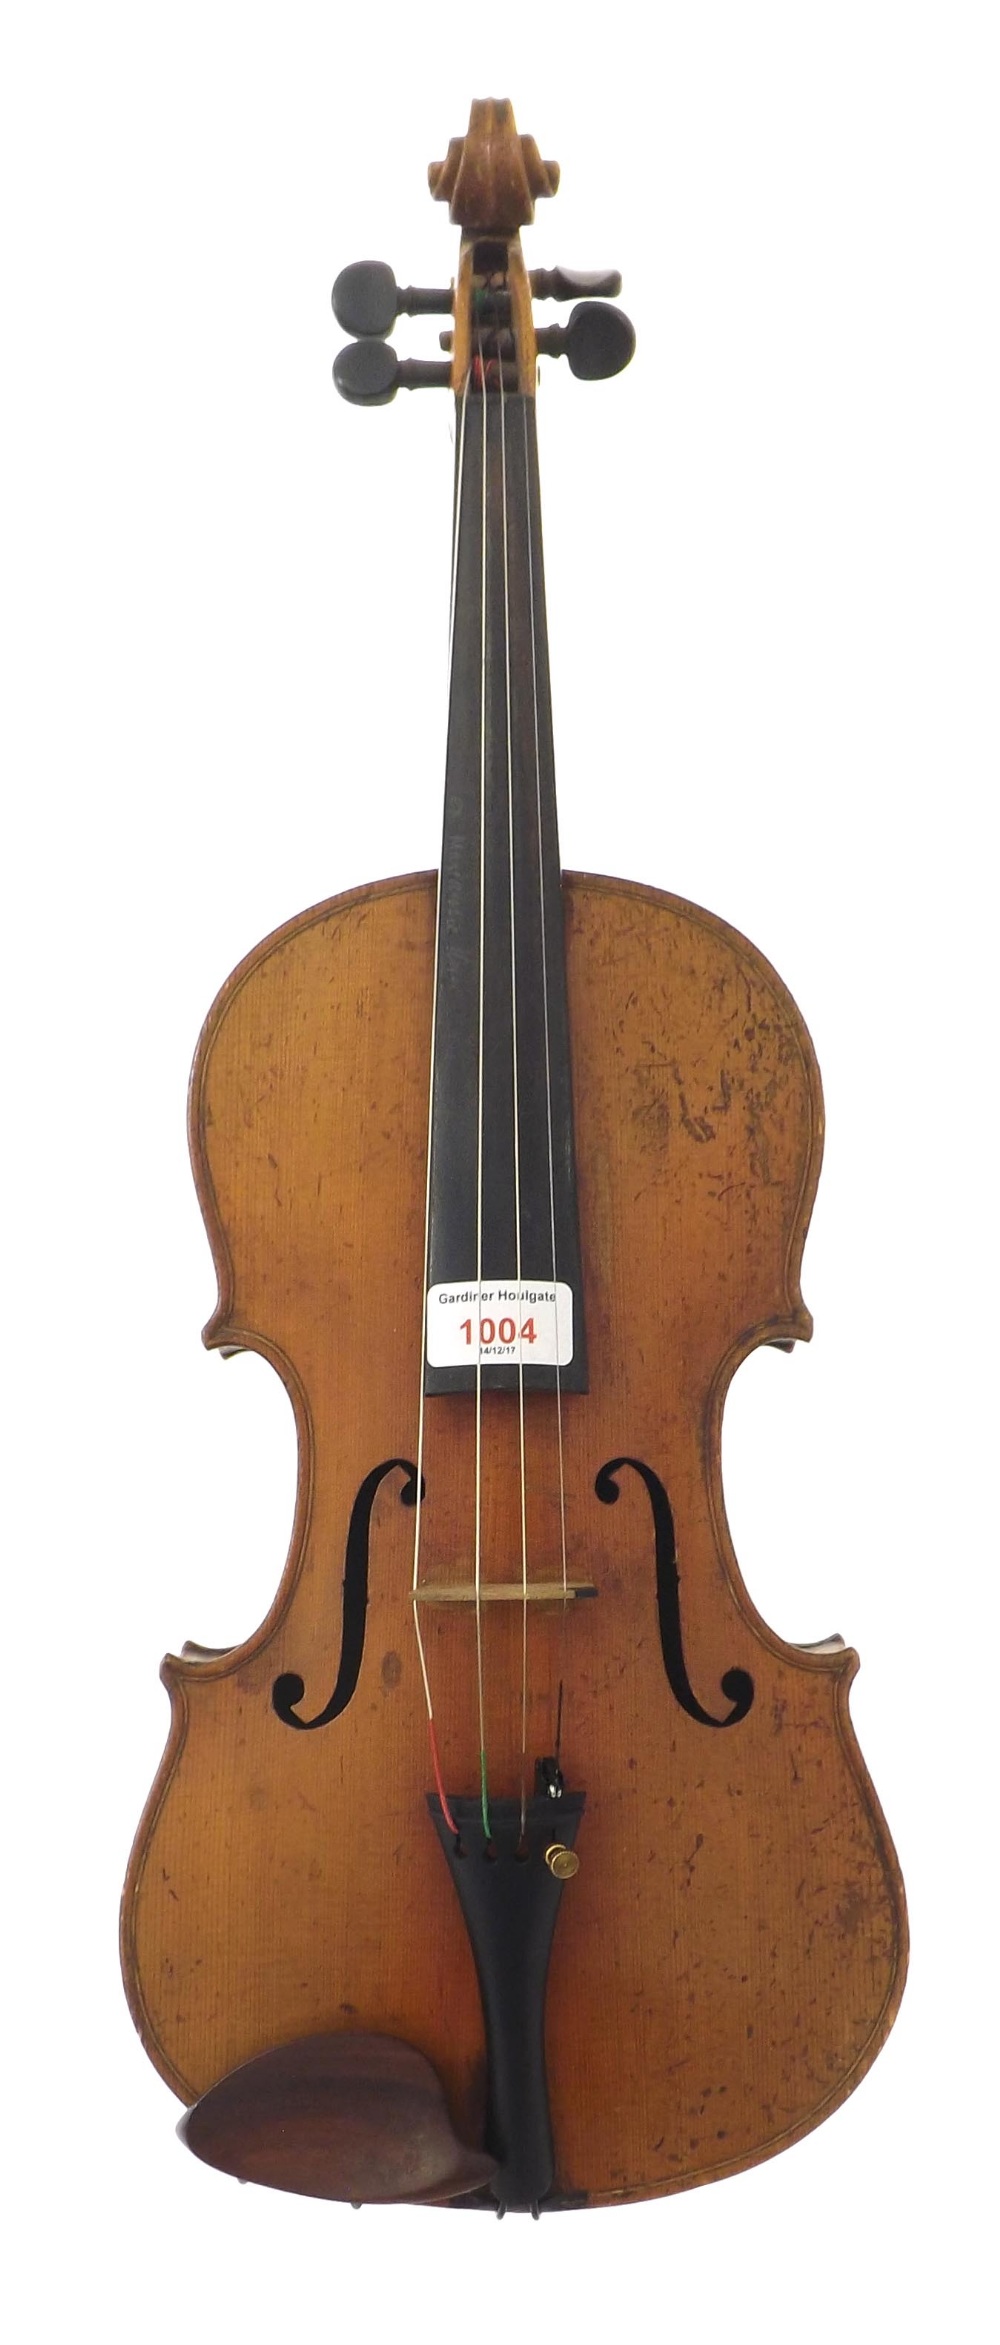 Late 19th century violin, possibly French, 14 3/16", 36cm